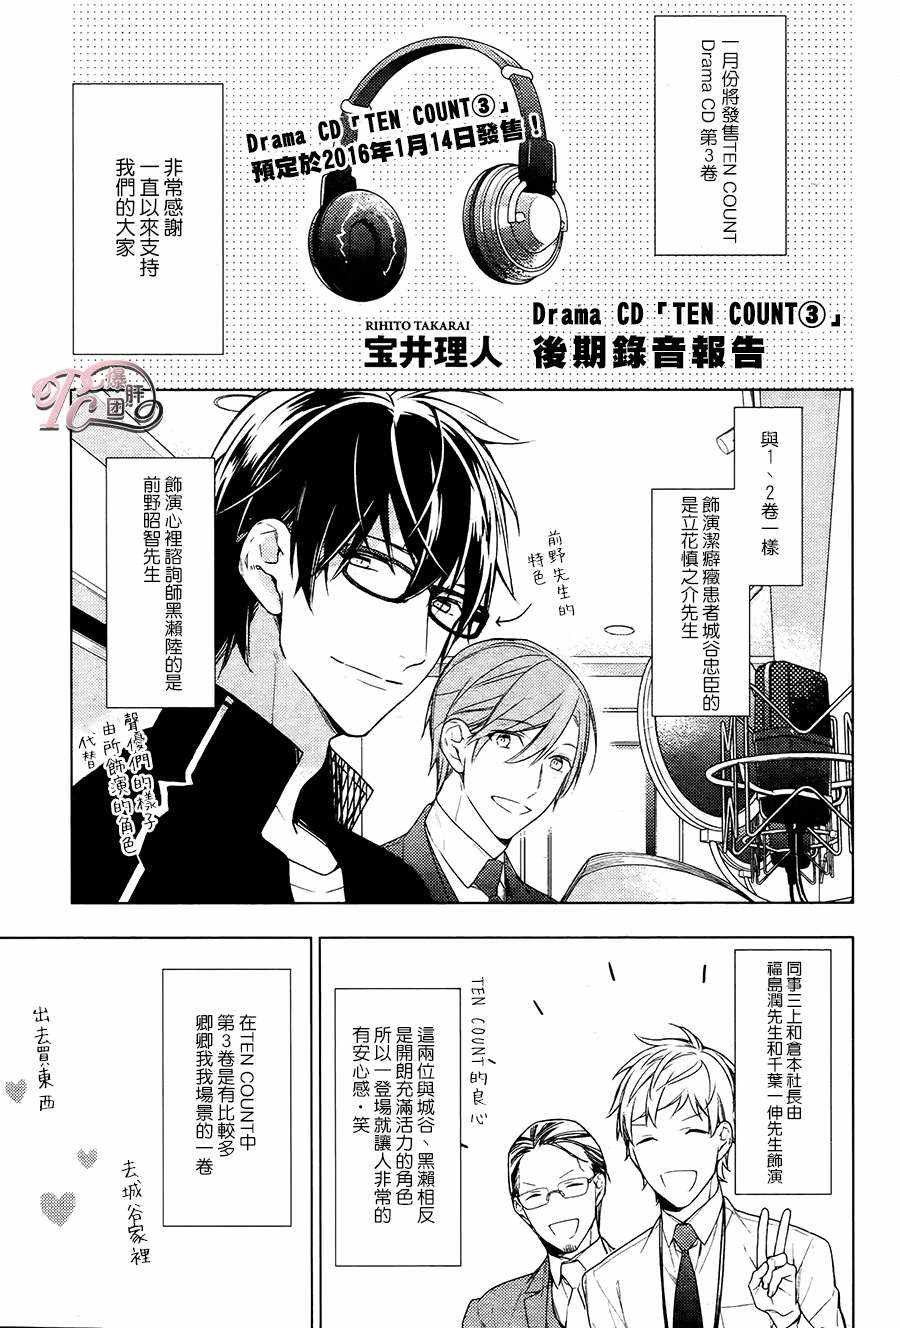 《10 COUNT》漫画 26话